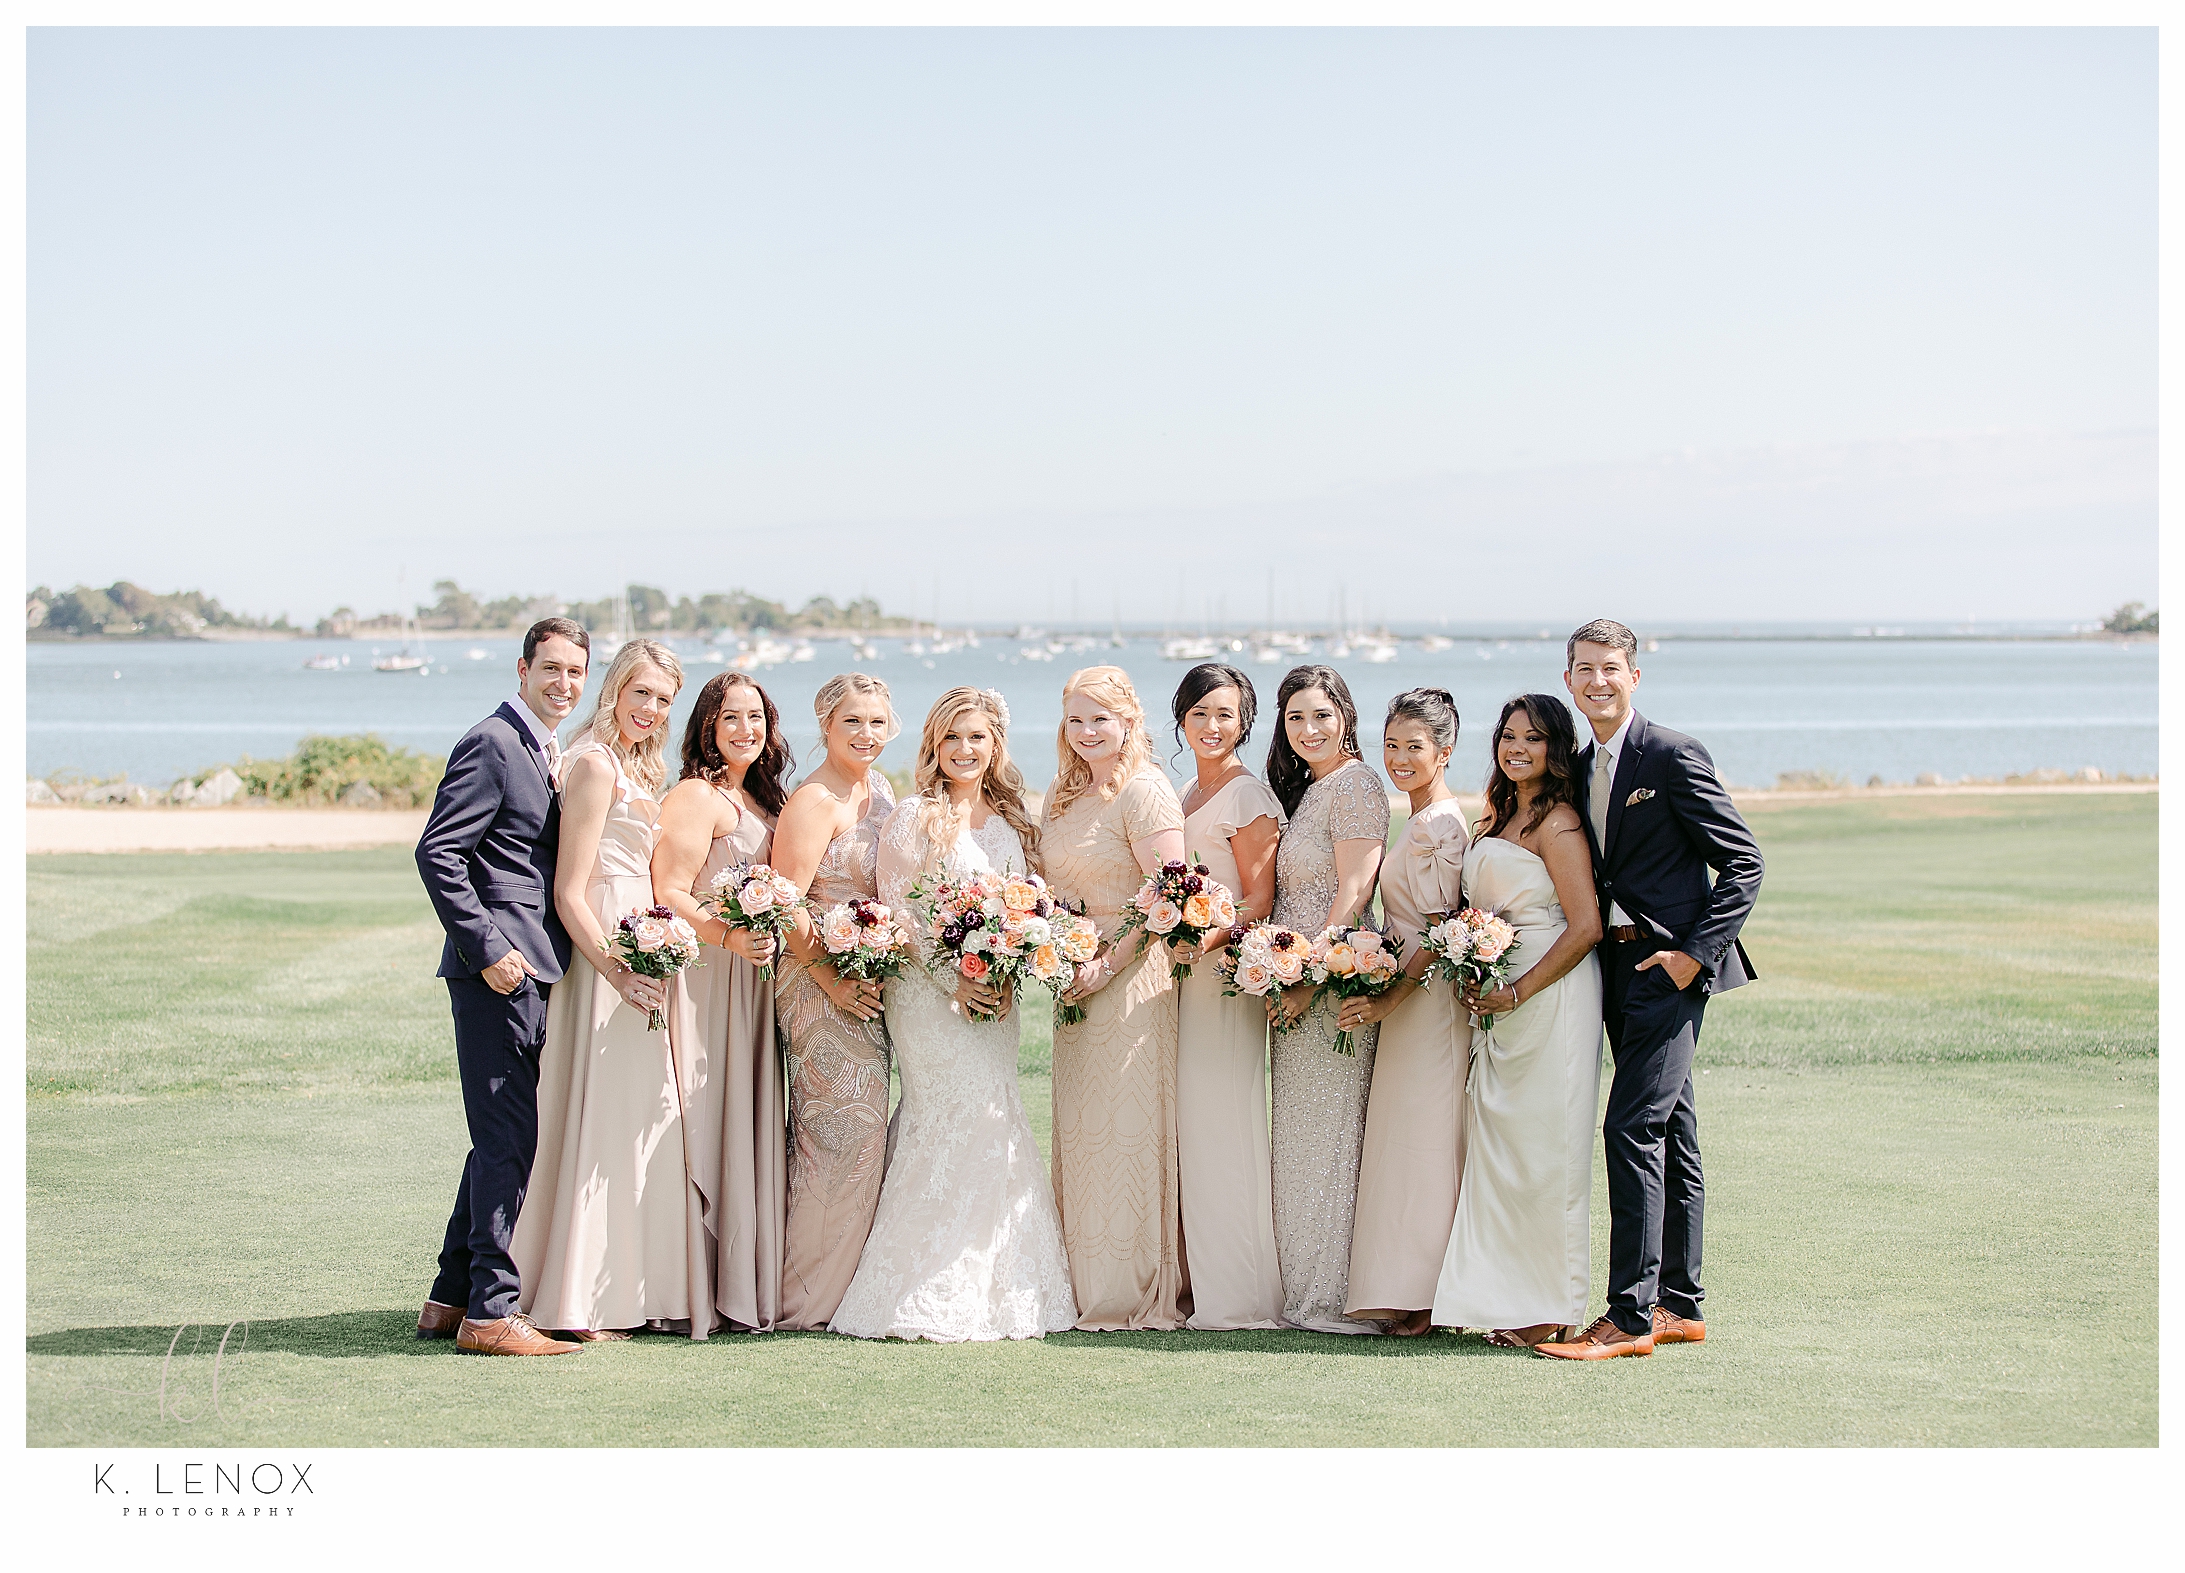 Wedding Party on the lawn of the Wentworth Country Club posing for a group photo.   Light and Airy, peachy neutral color dresses. 